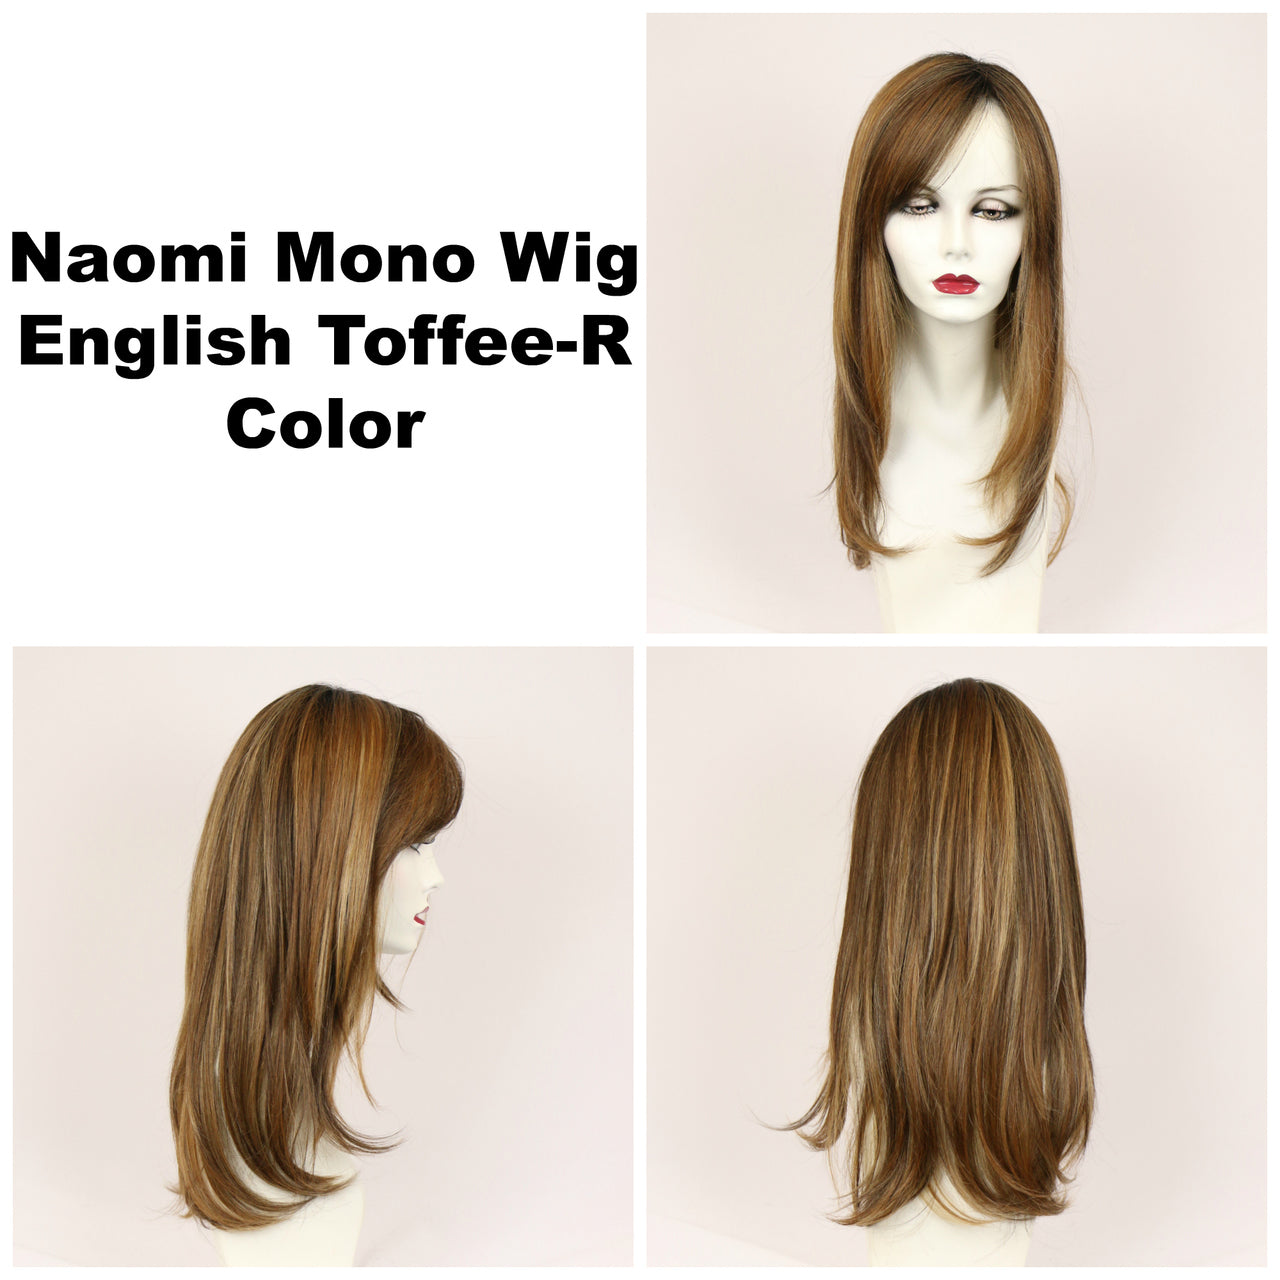 English Toffee-R / Naomi Monofilament w/ Roots / Long Wig